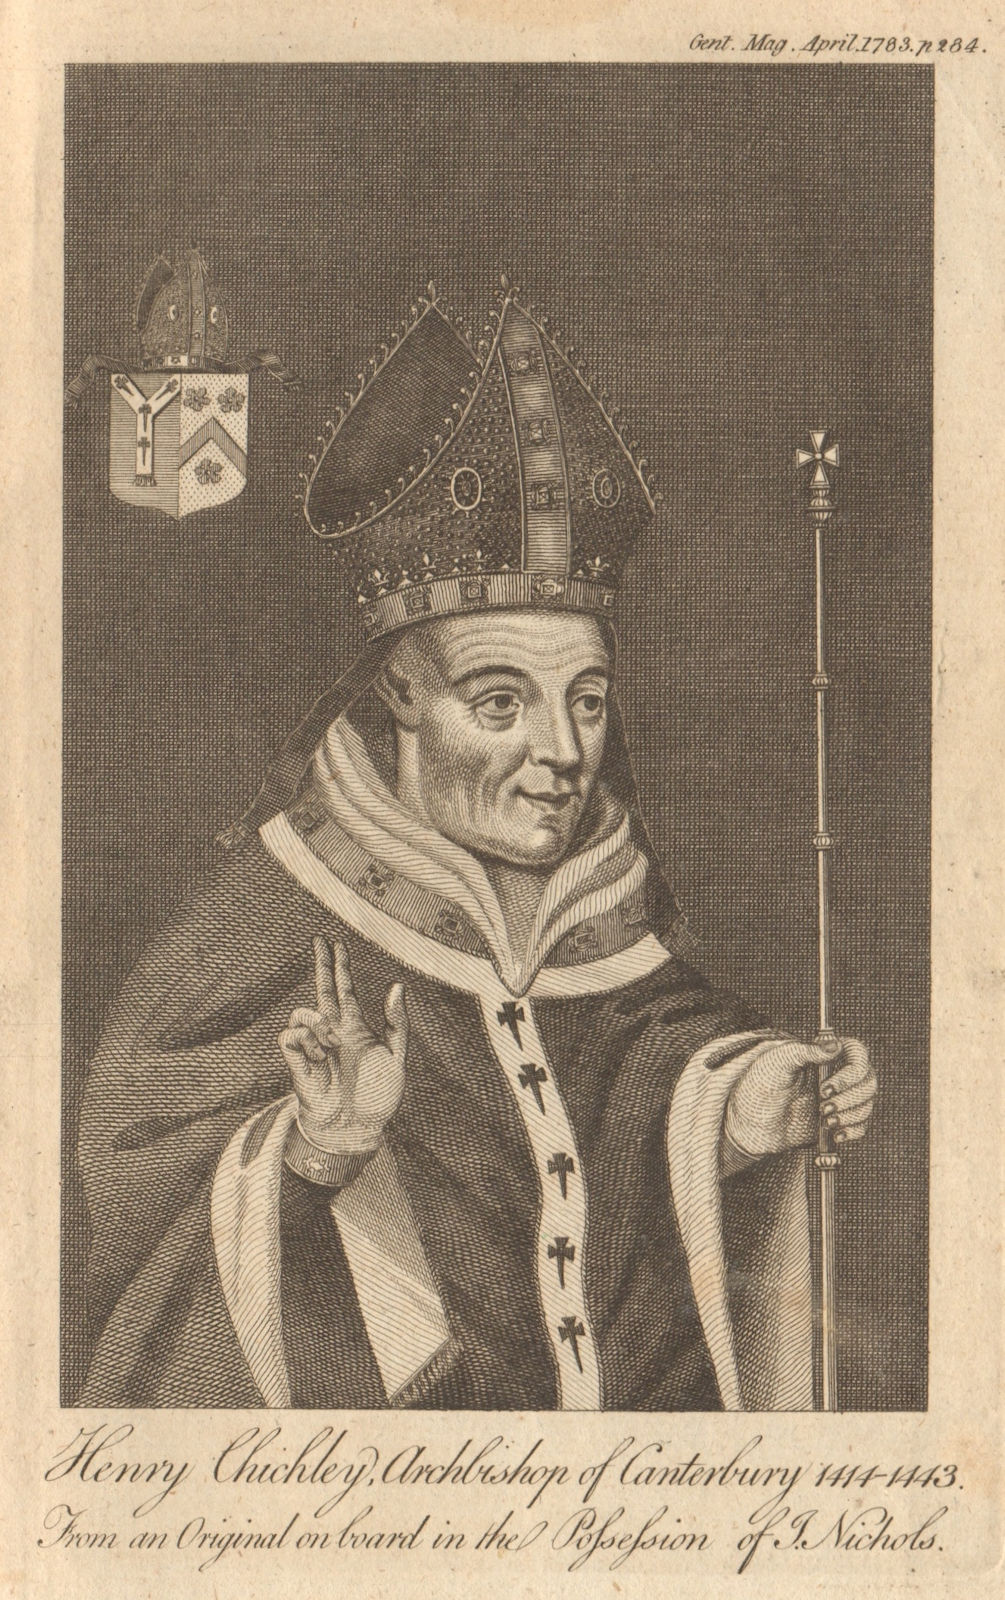 Henry Chichele. Archbishop of Canterbury 1414-43. Founded All Souls Oxford 1783